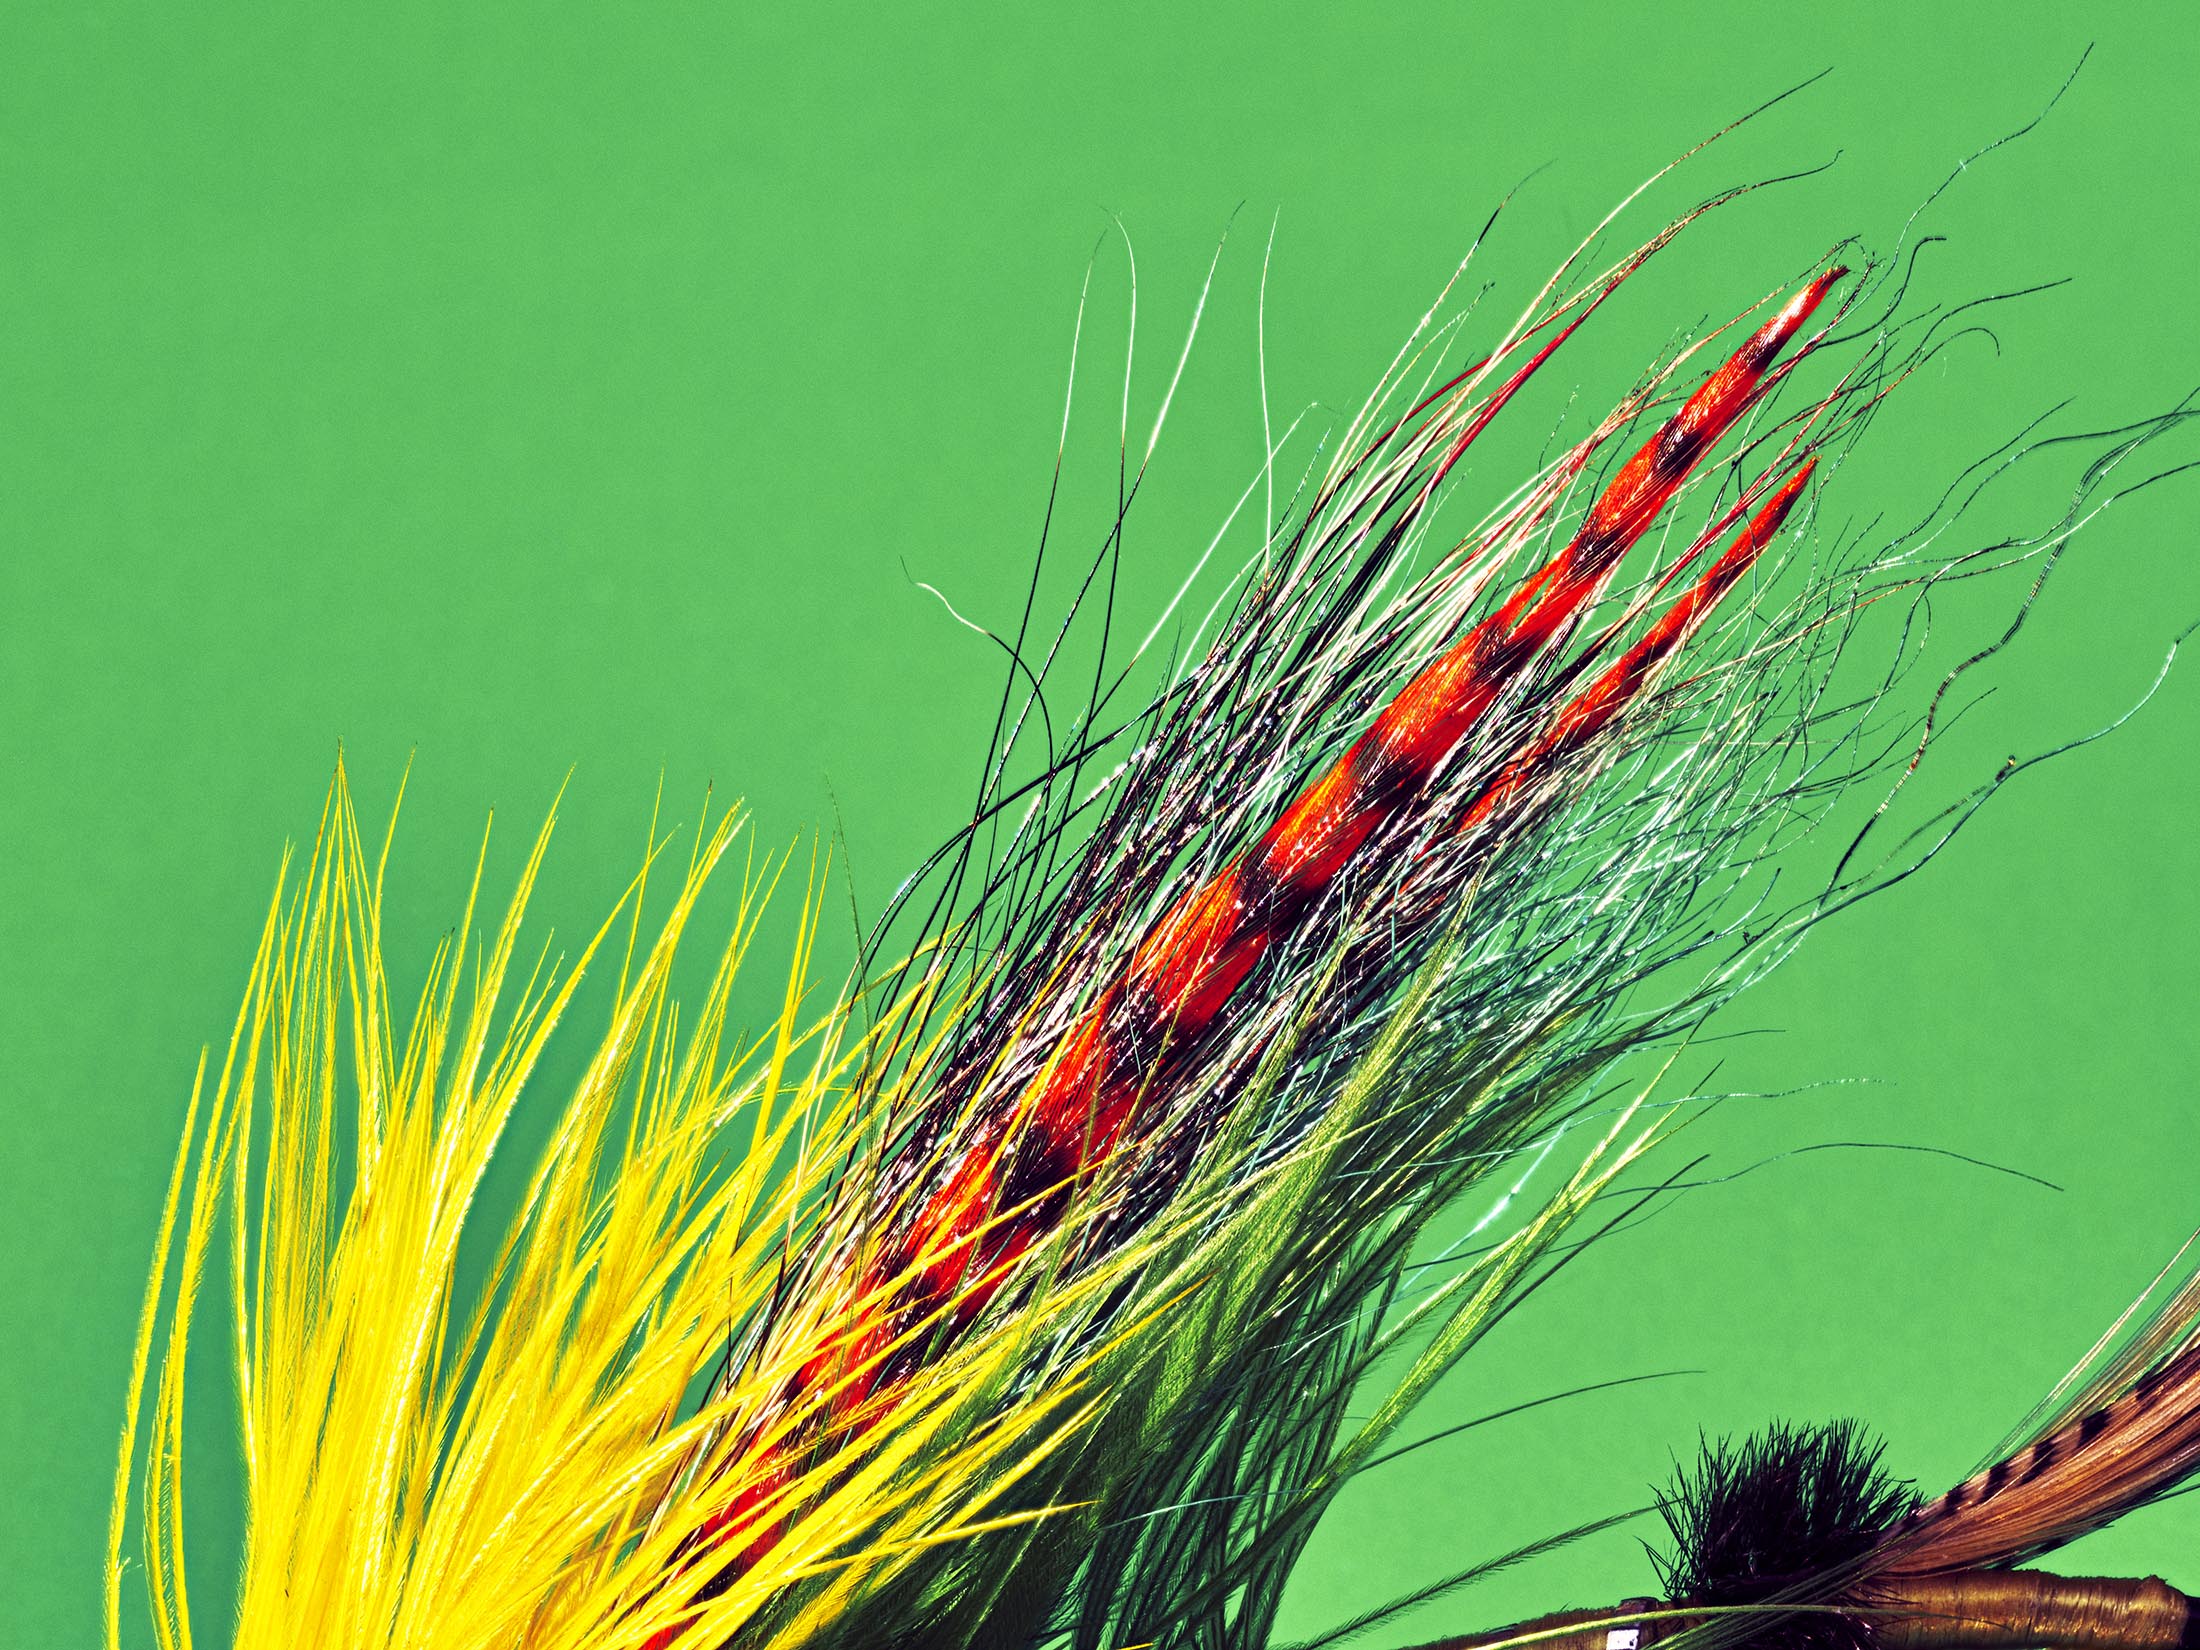 Tying Fishing Flies With Henry Hoffman, Grizzly Hackle Feathers